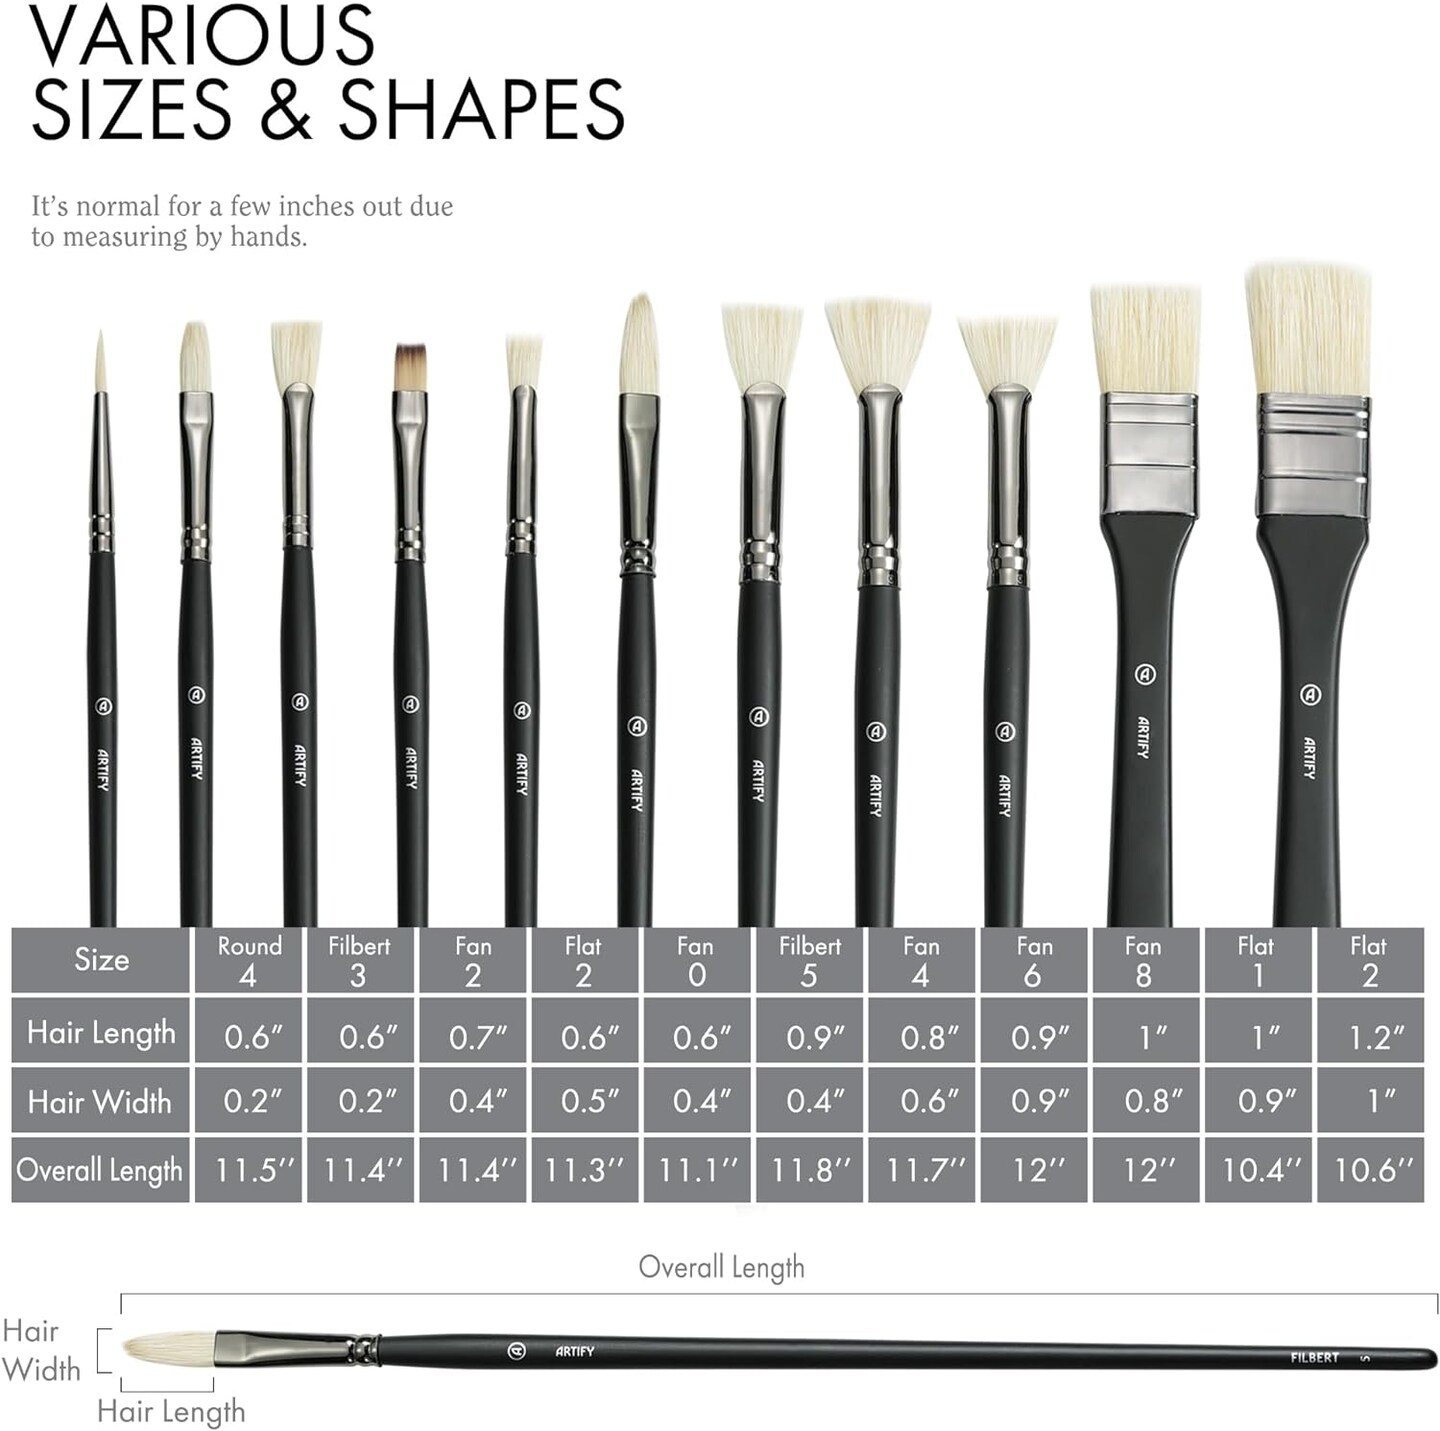 ARTIFY Oil Paint Brush Set - 11 Pieces | Professional Artist Paint Brush Set for Oil Painting | Natural Hog Bristle Brushes with an Additional Nylon Brush, Perfect for Oil, Acylic and Gouache